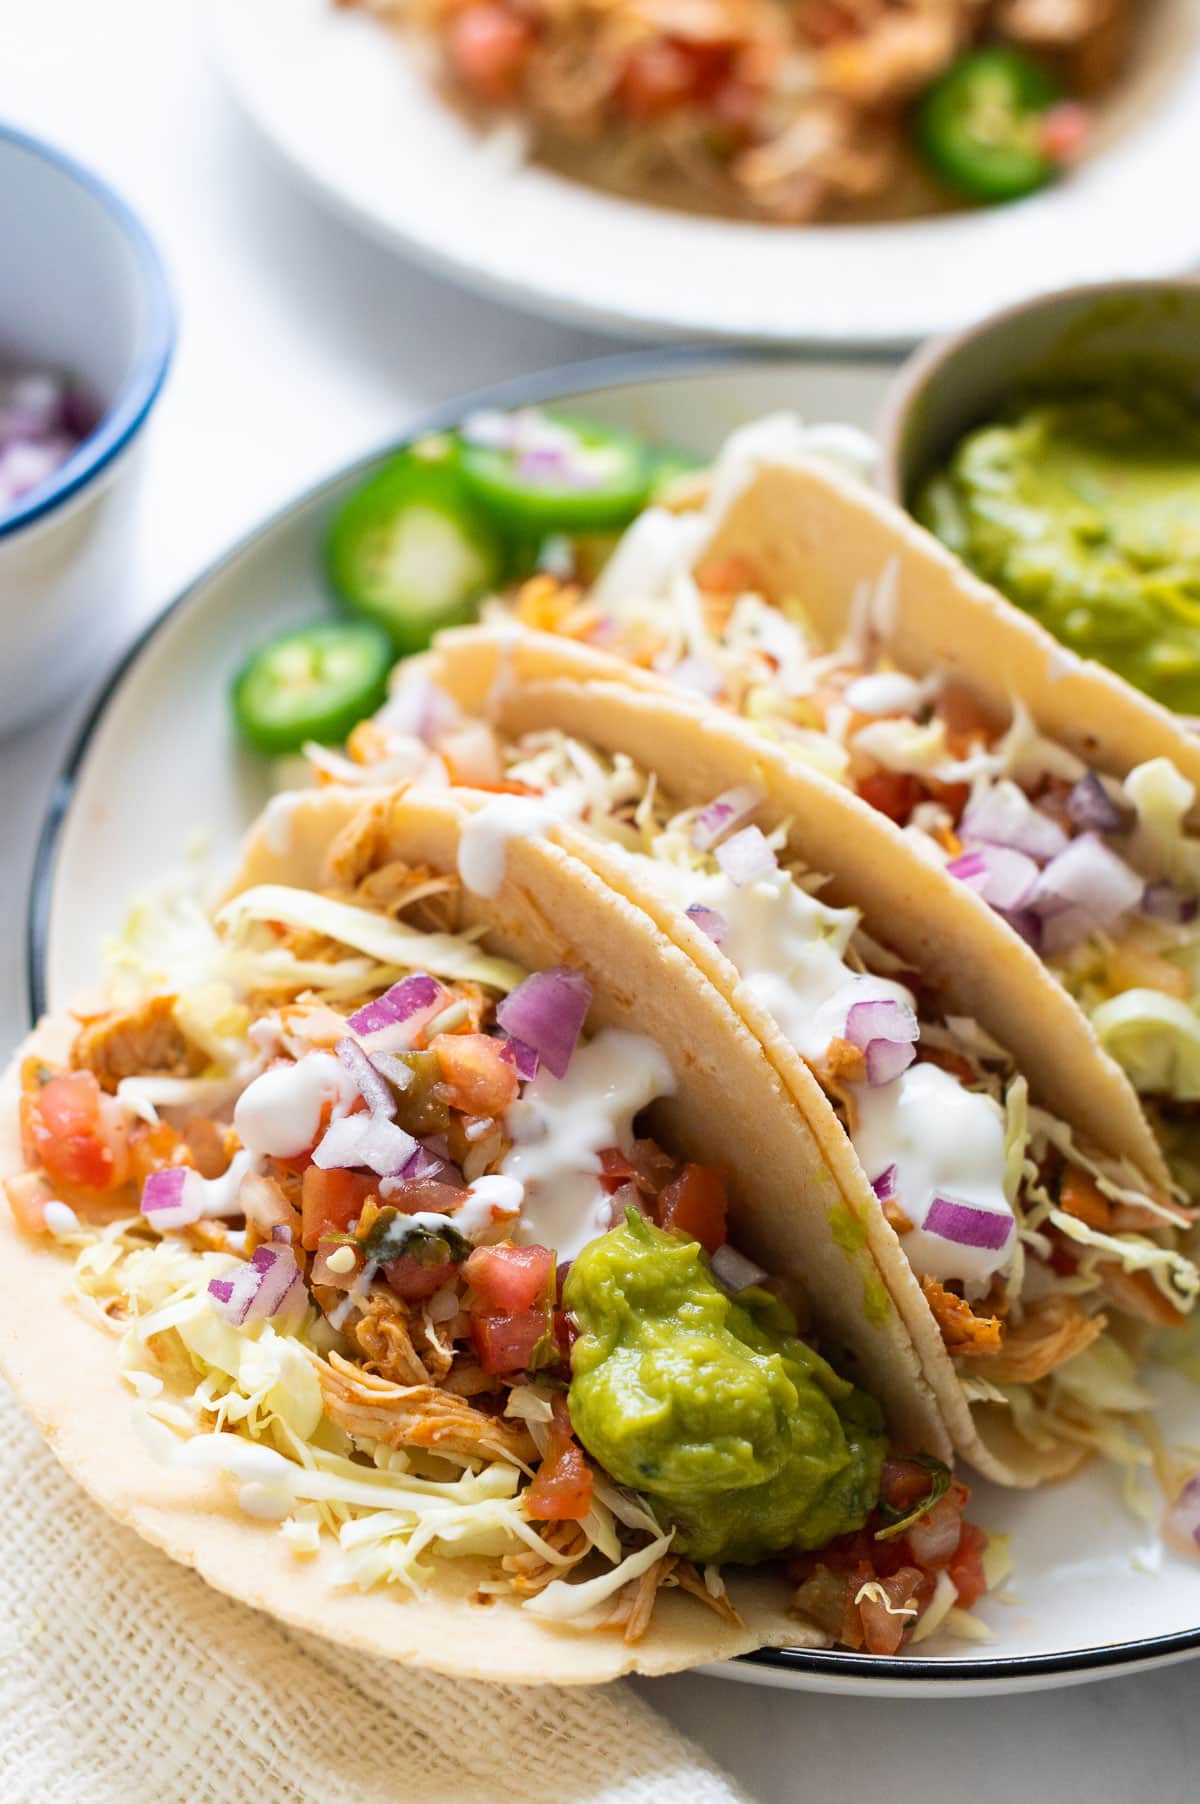 Instant Pot shredded chicken tacos with cabbage, pico de gallo, guacamole and crema served on a plate.